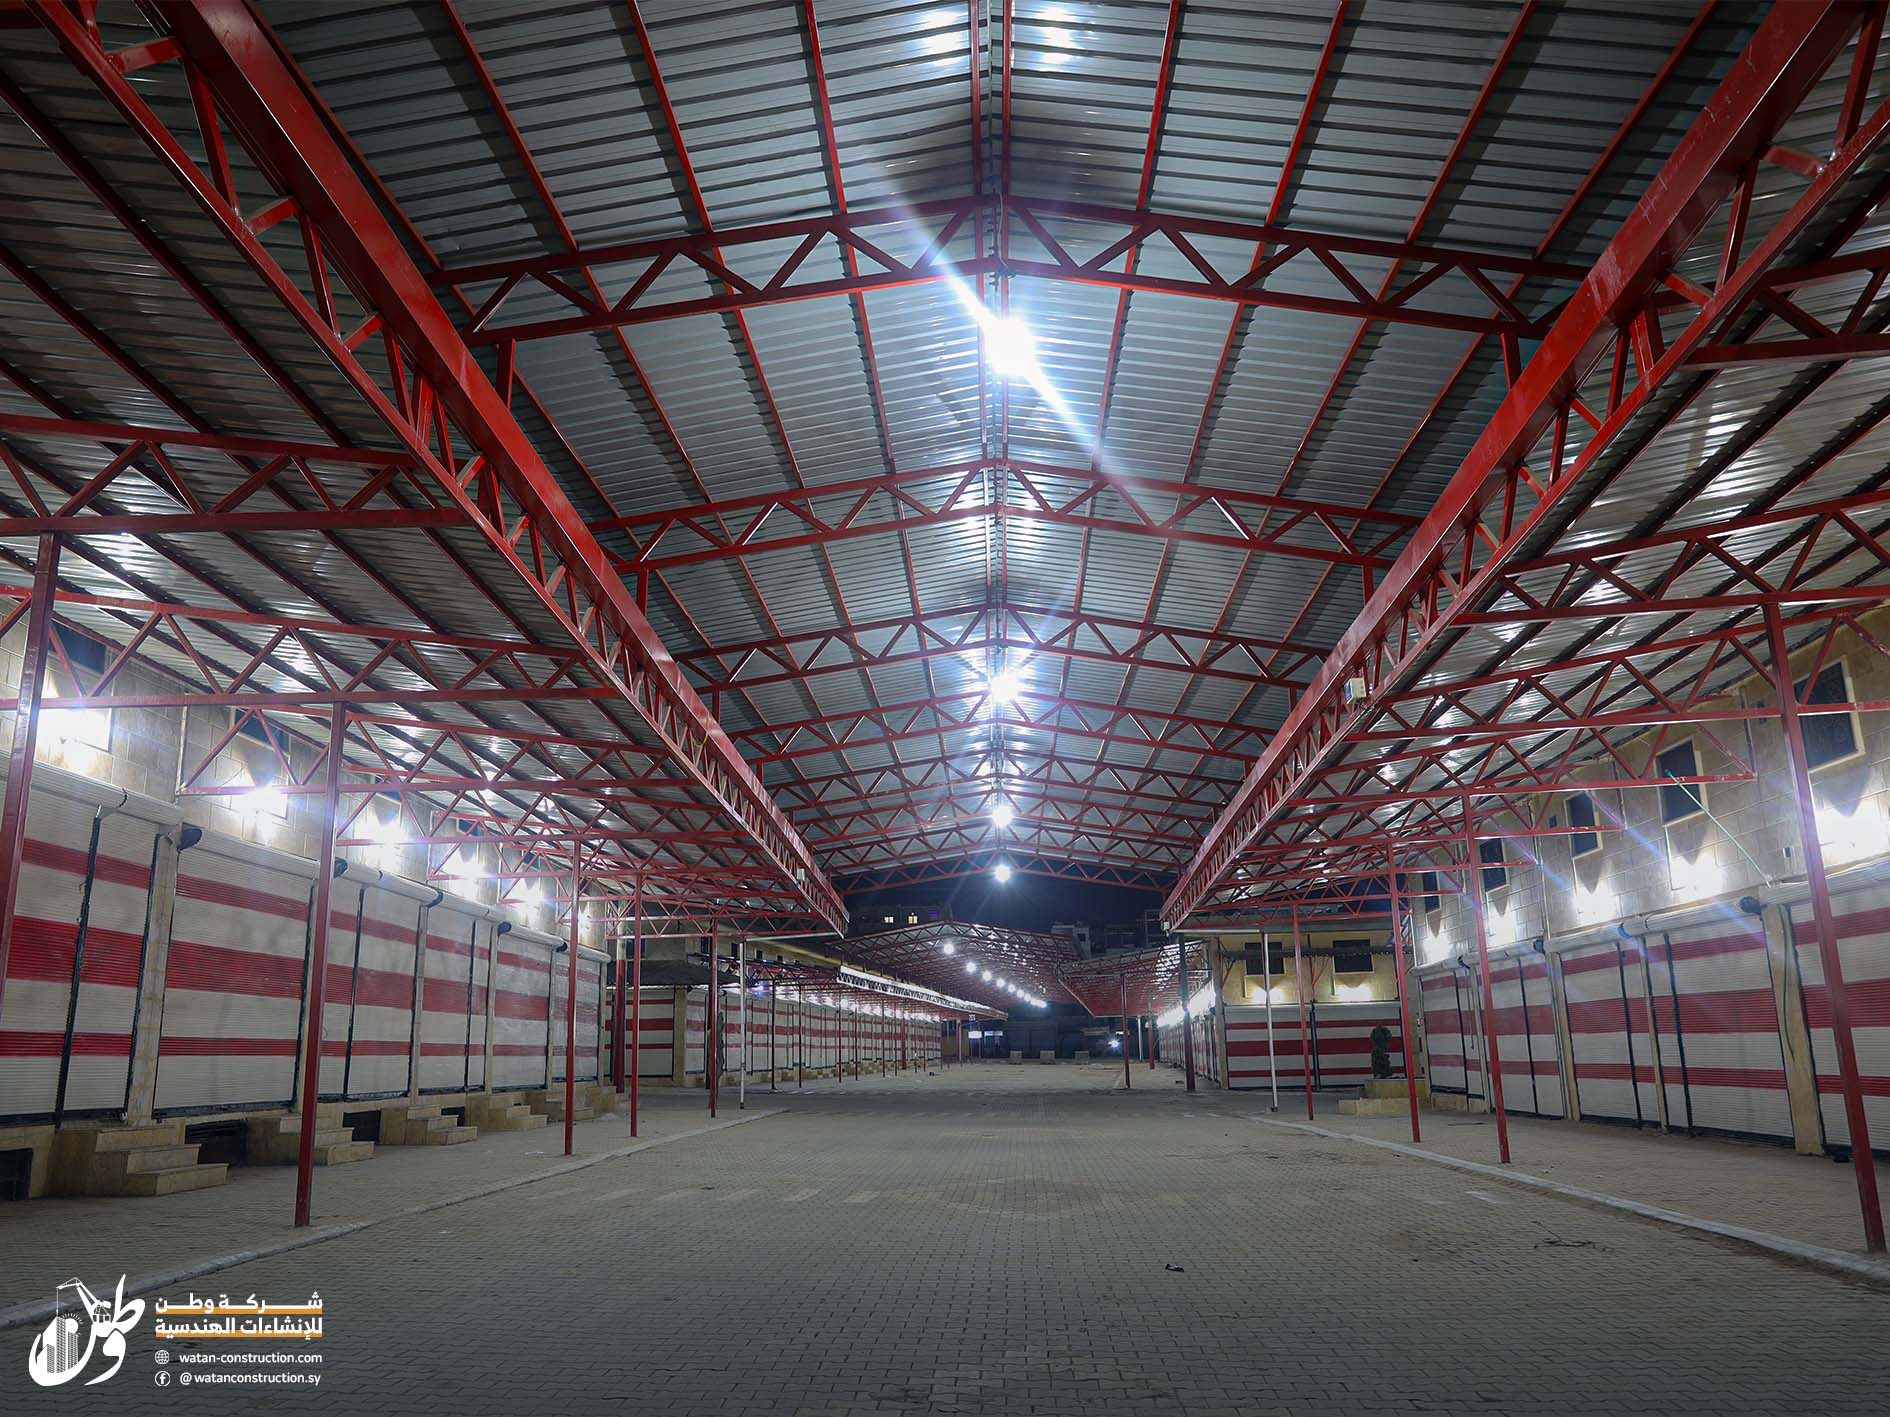 Night photos of the oil and grain market in Afrin4